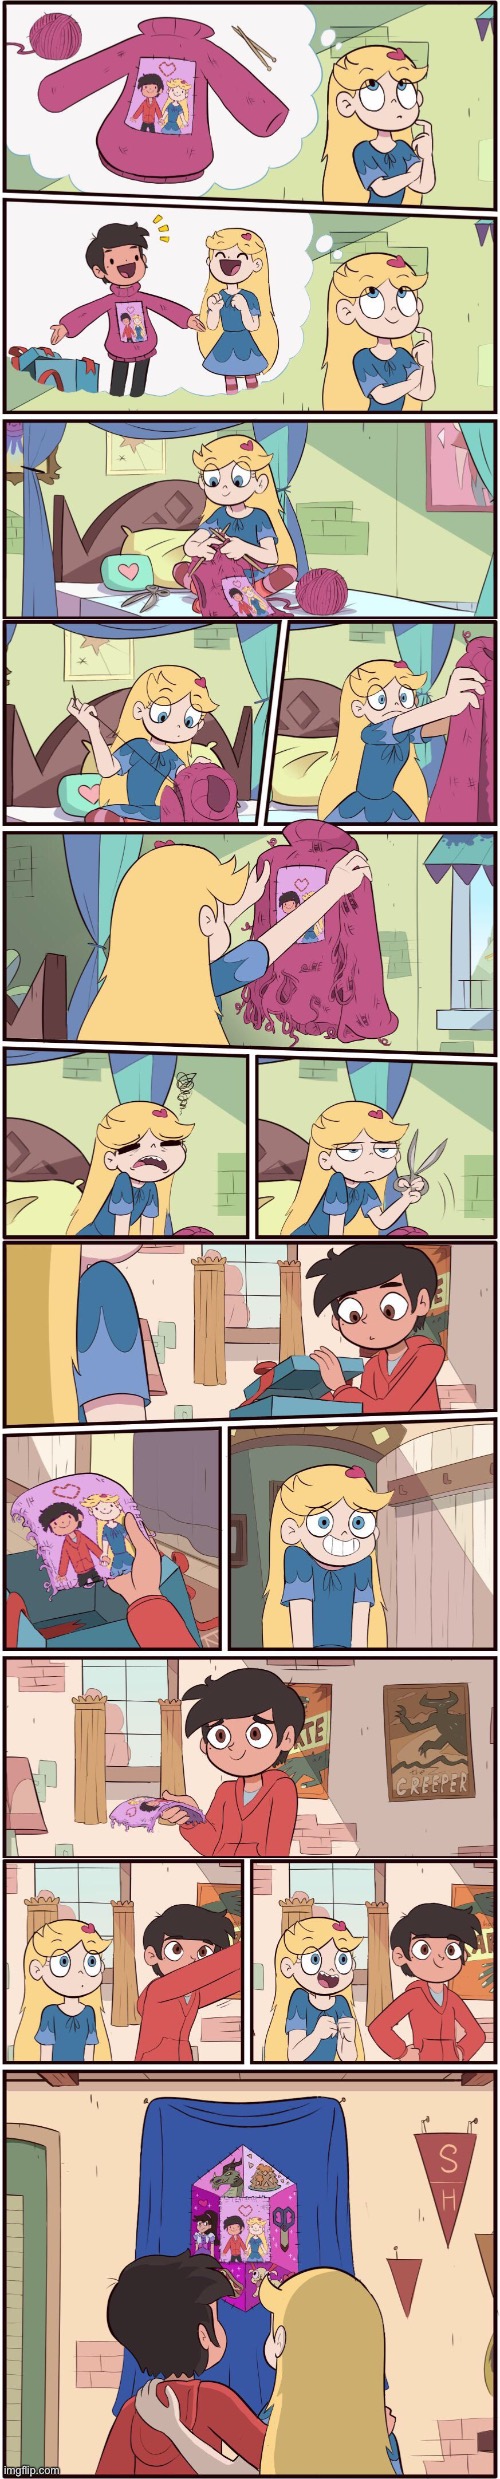 MorningMark - Stitching Together | image tagged in morningmark,comics,star vs the forces of evil,svtfoe,memes,stop reading the tags | made w/ Imgflip meme maker